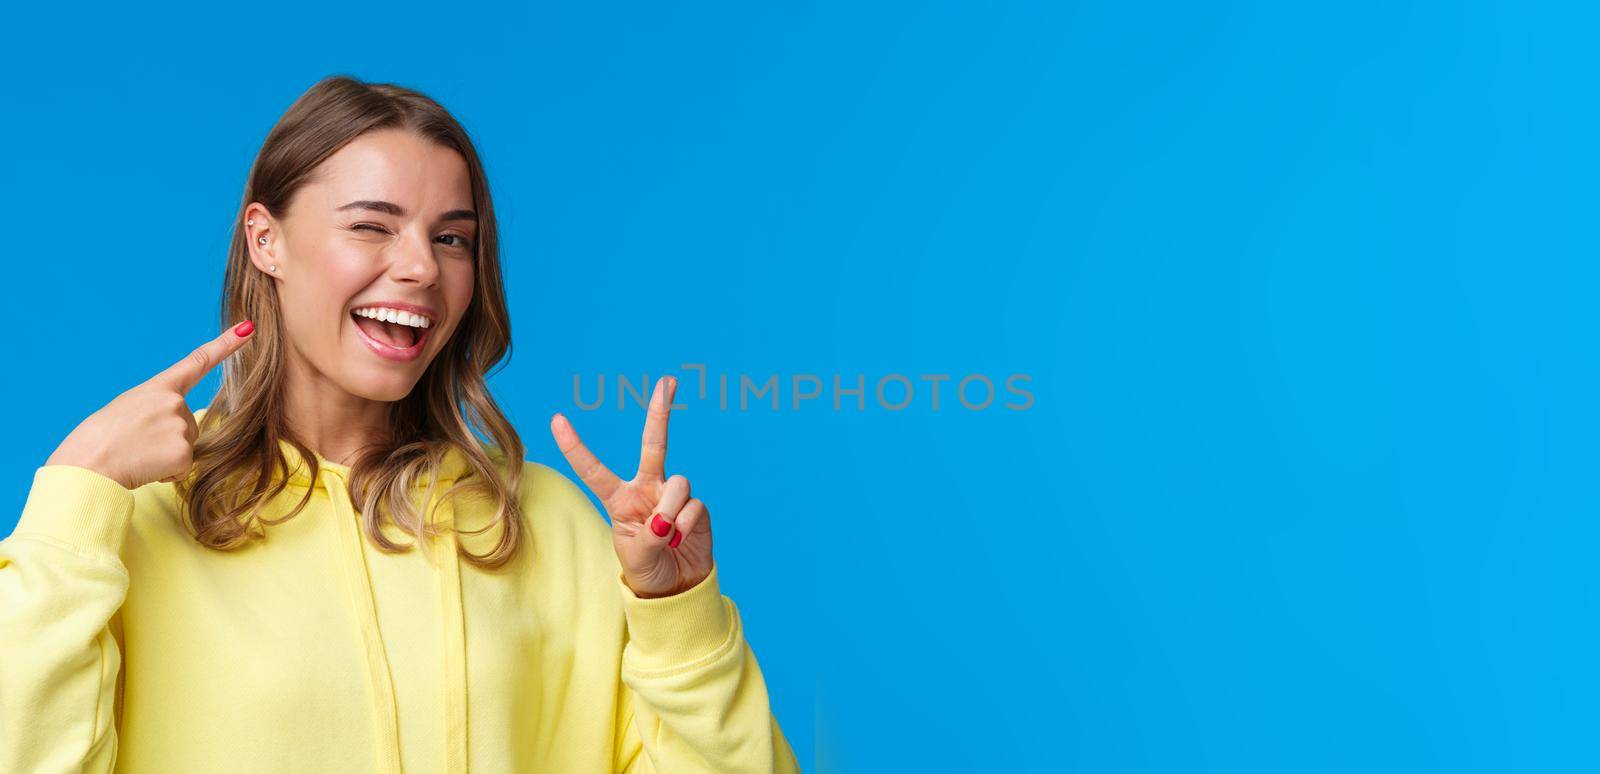 Close-up portrait of proud and boastful cute blond girl with short hair and pierced ear, pointing at herself and make peace gesture with pleased smile, standing blue background upbeat.